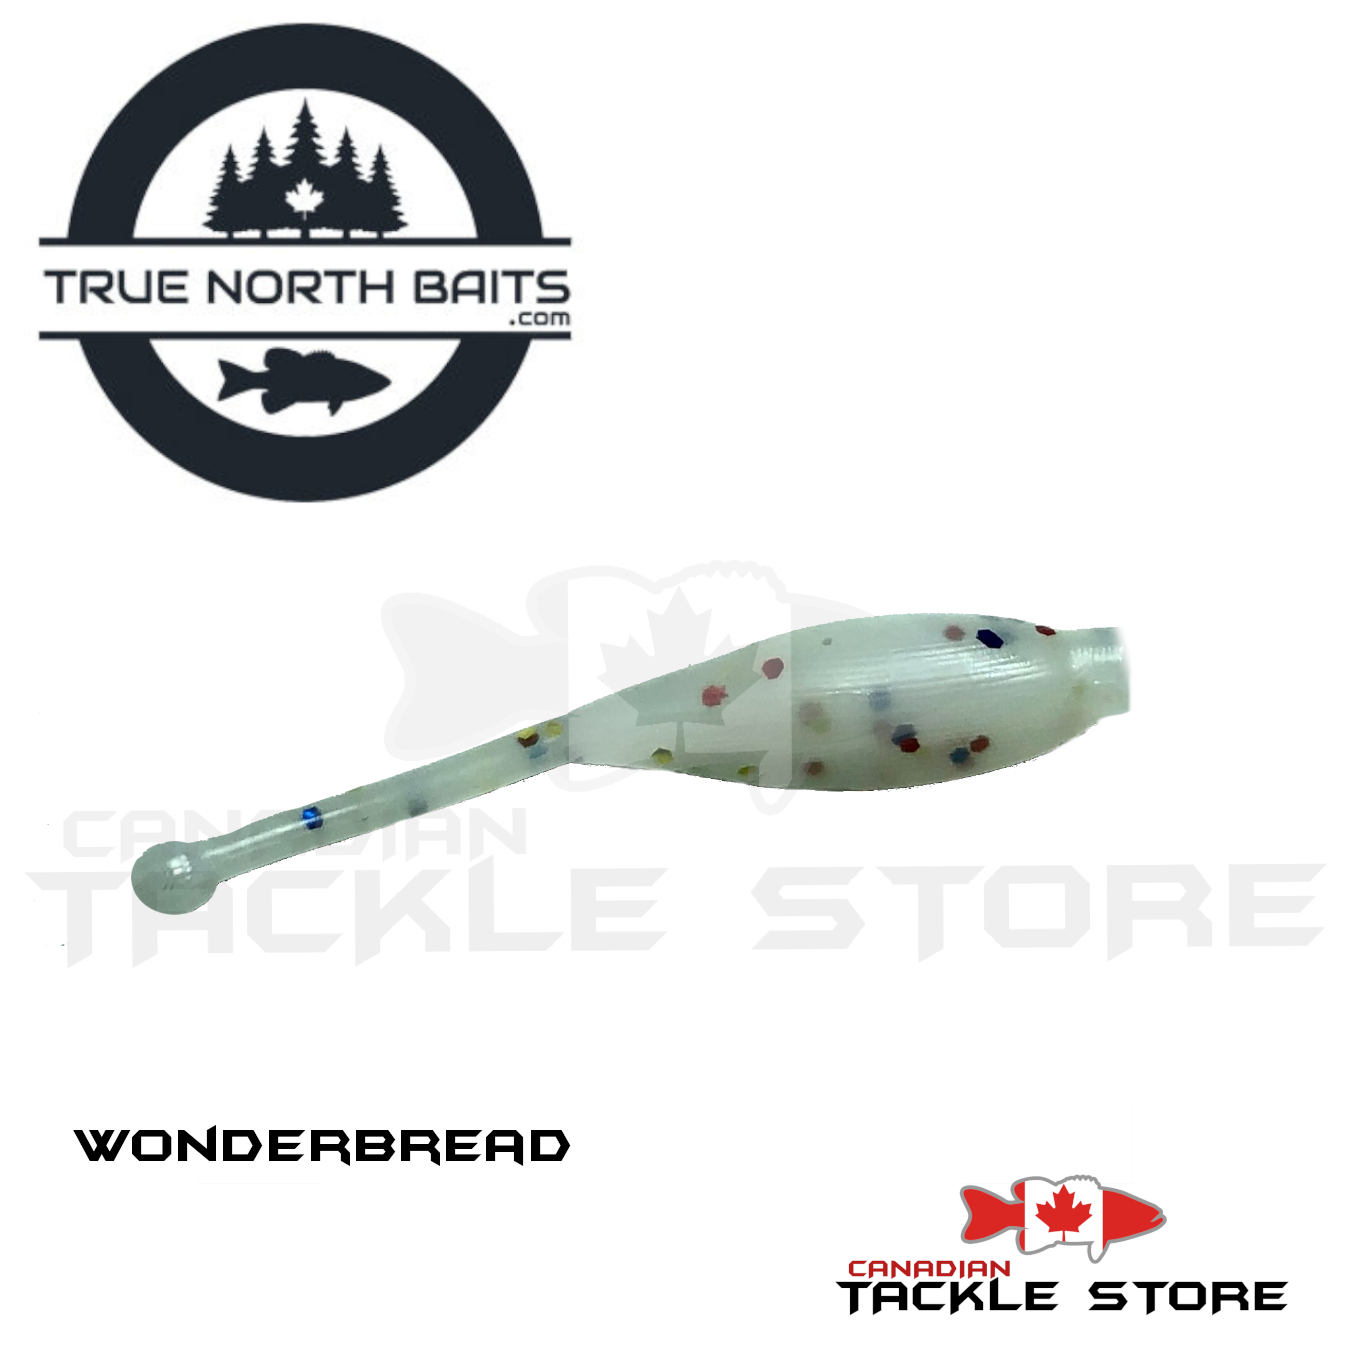 True North Baits – Canadian Tackle Store